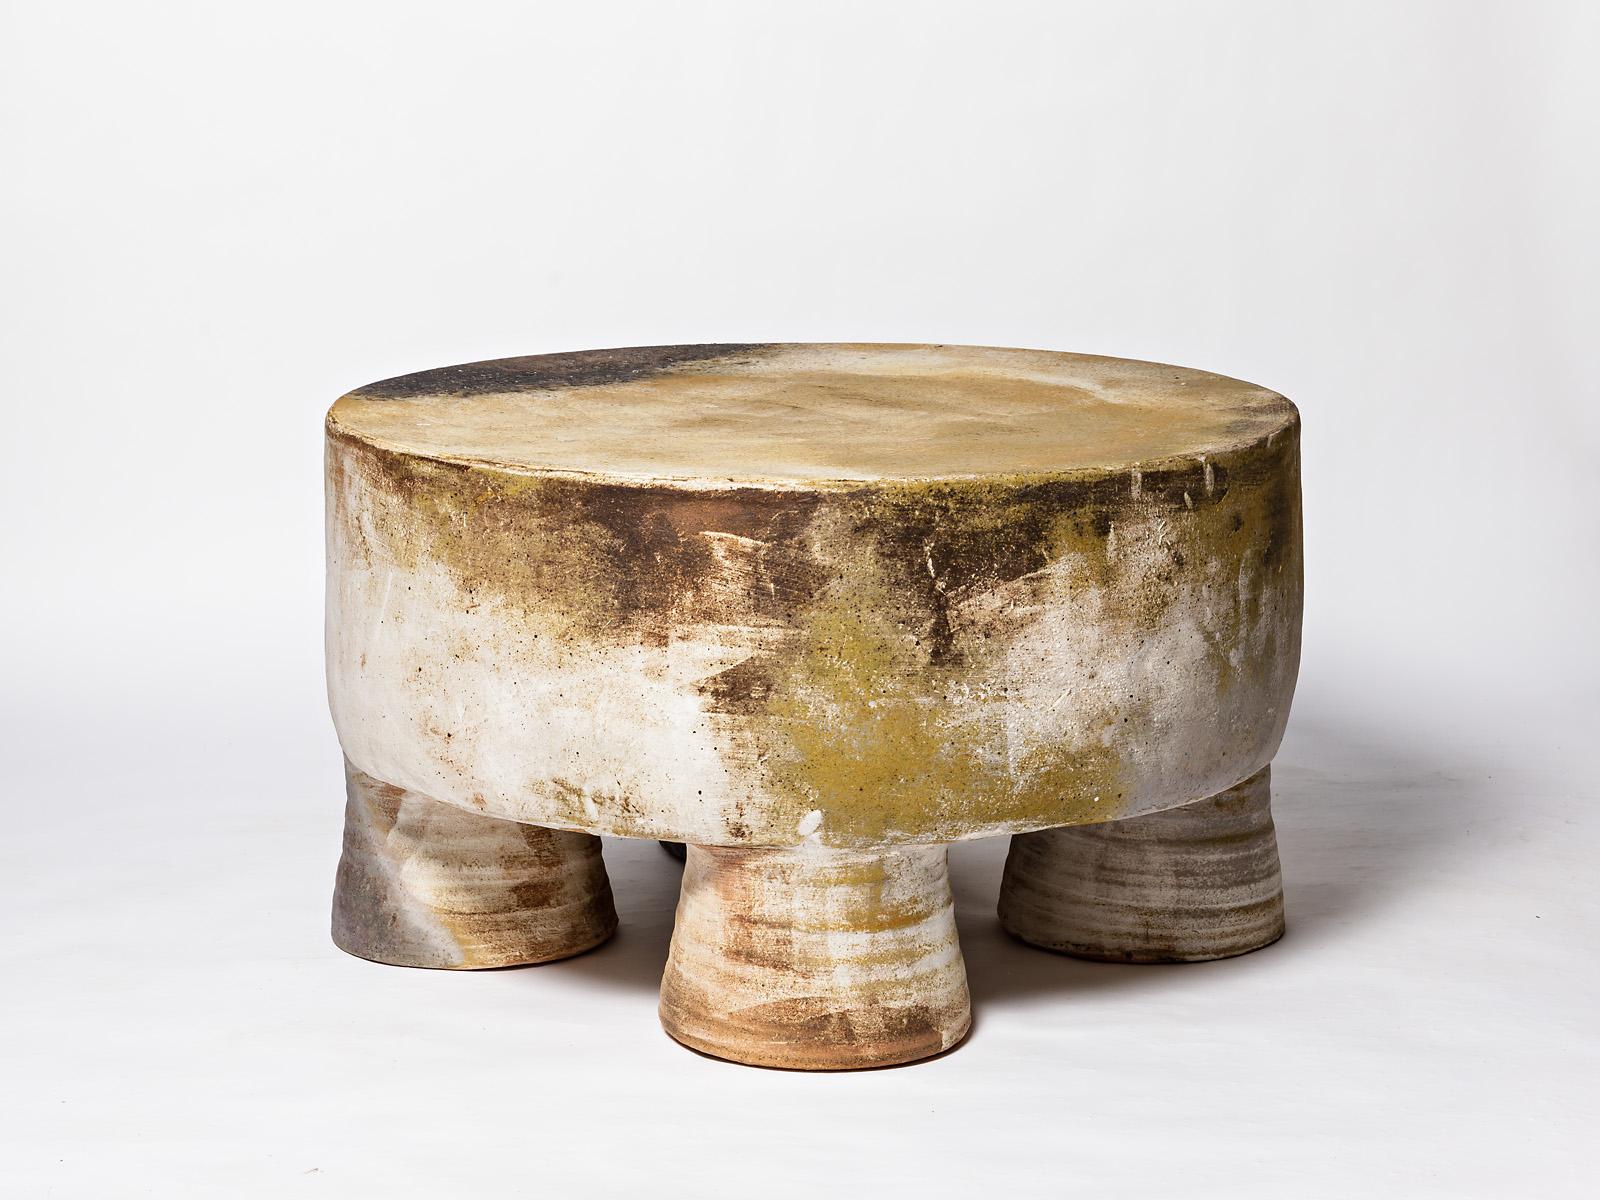 An exceptionnal ceramic coffee table by Mia Jensen.
Wood firing.
Kaolin engobe.
Signed at the base 